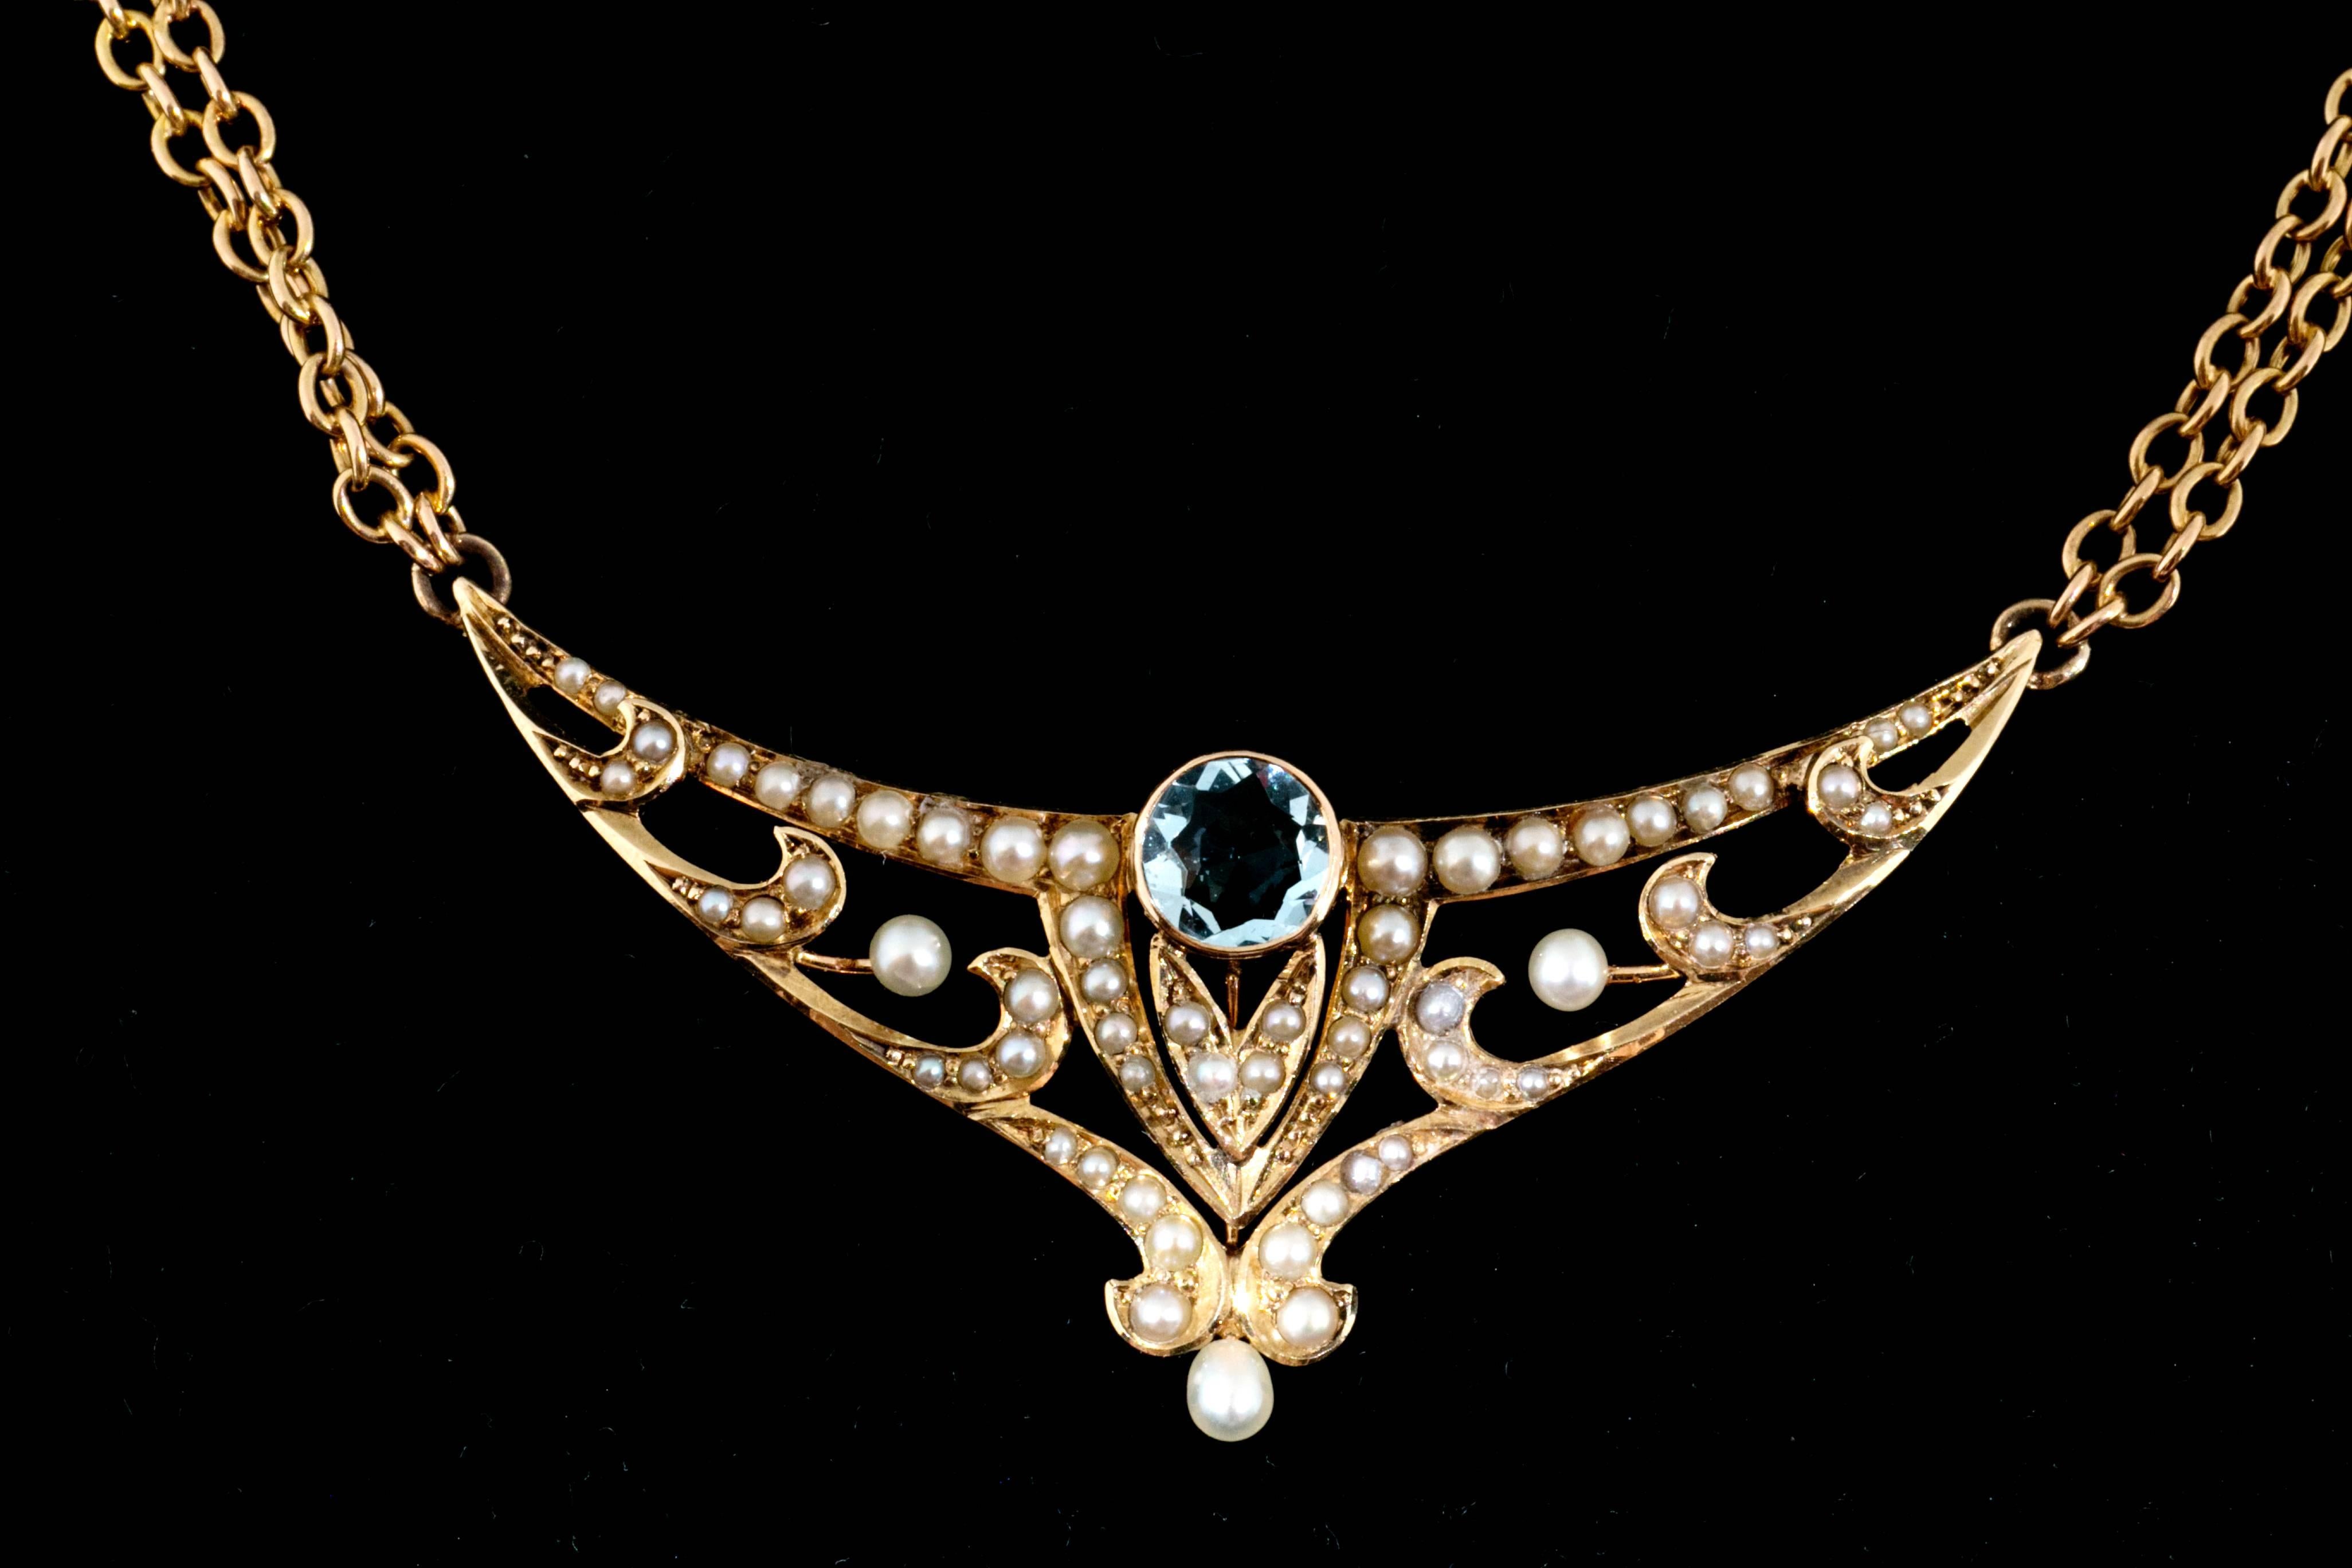 Handmade untreated Aquamarine natural pearl pendant and double chain. 18 ½ inch length. Circa 1890-1900

1 tear drop shaped pearl
1 round Aquamarine approx. total weight .75cts
44 seed pearls
(2) 2mm natural pearls
14k Yellow Gold
Stamped &